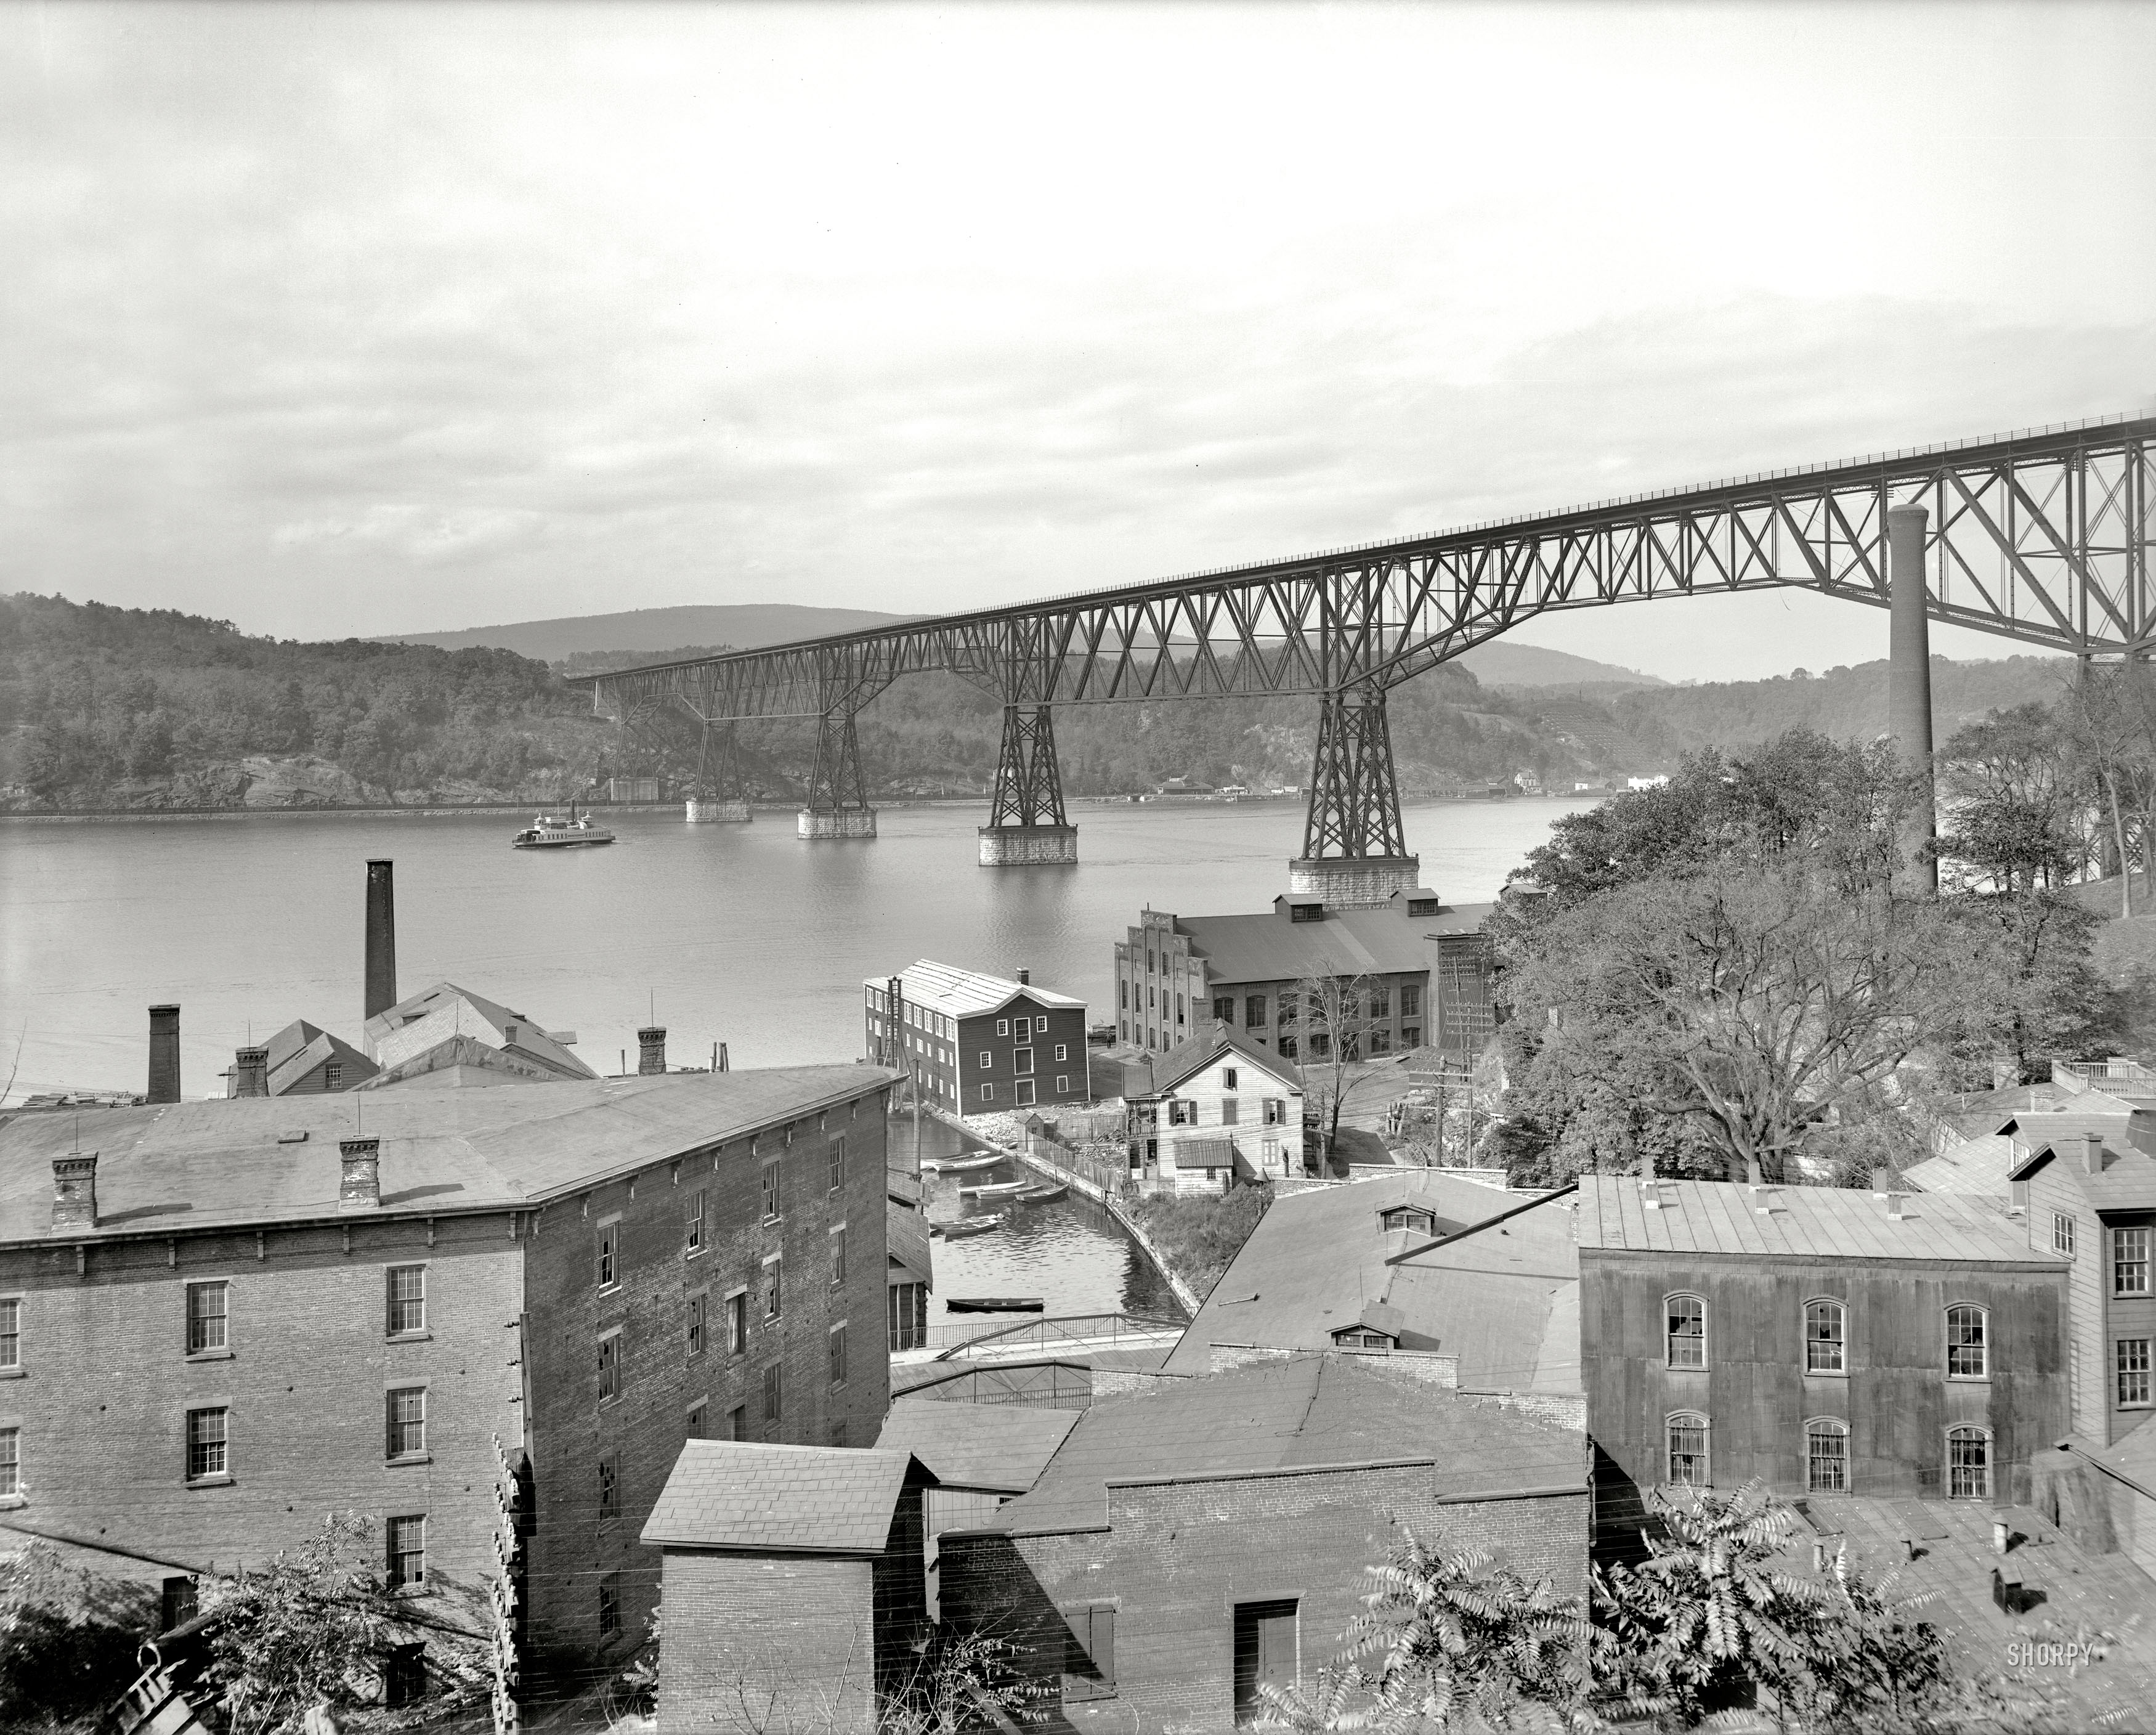 New York circa 1905. "Poughkeepsie Bridge." Another look at the giant railroad bridge over the Hudson River. 8x10 inch glass negative. View full size.